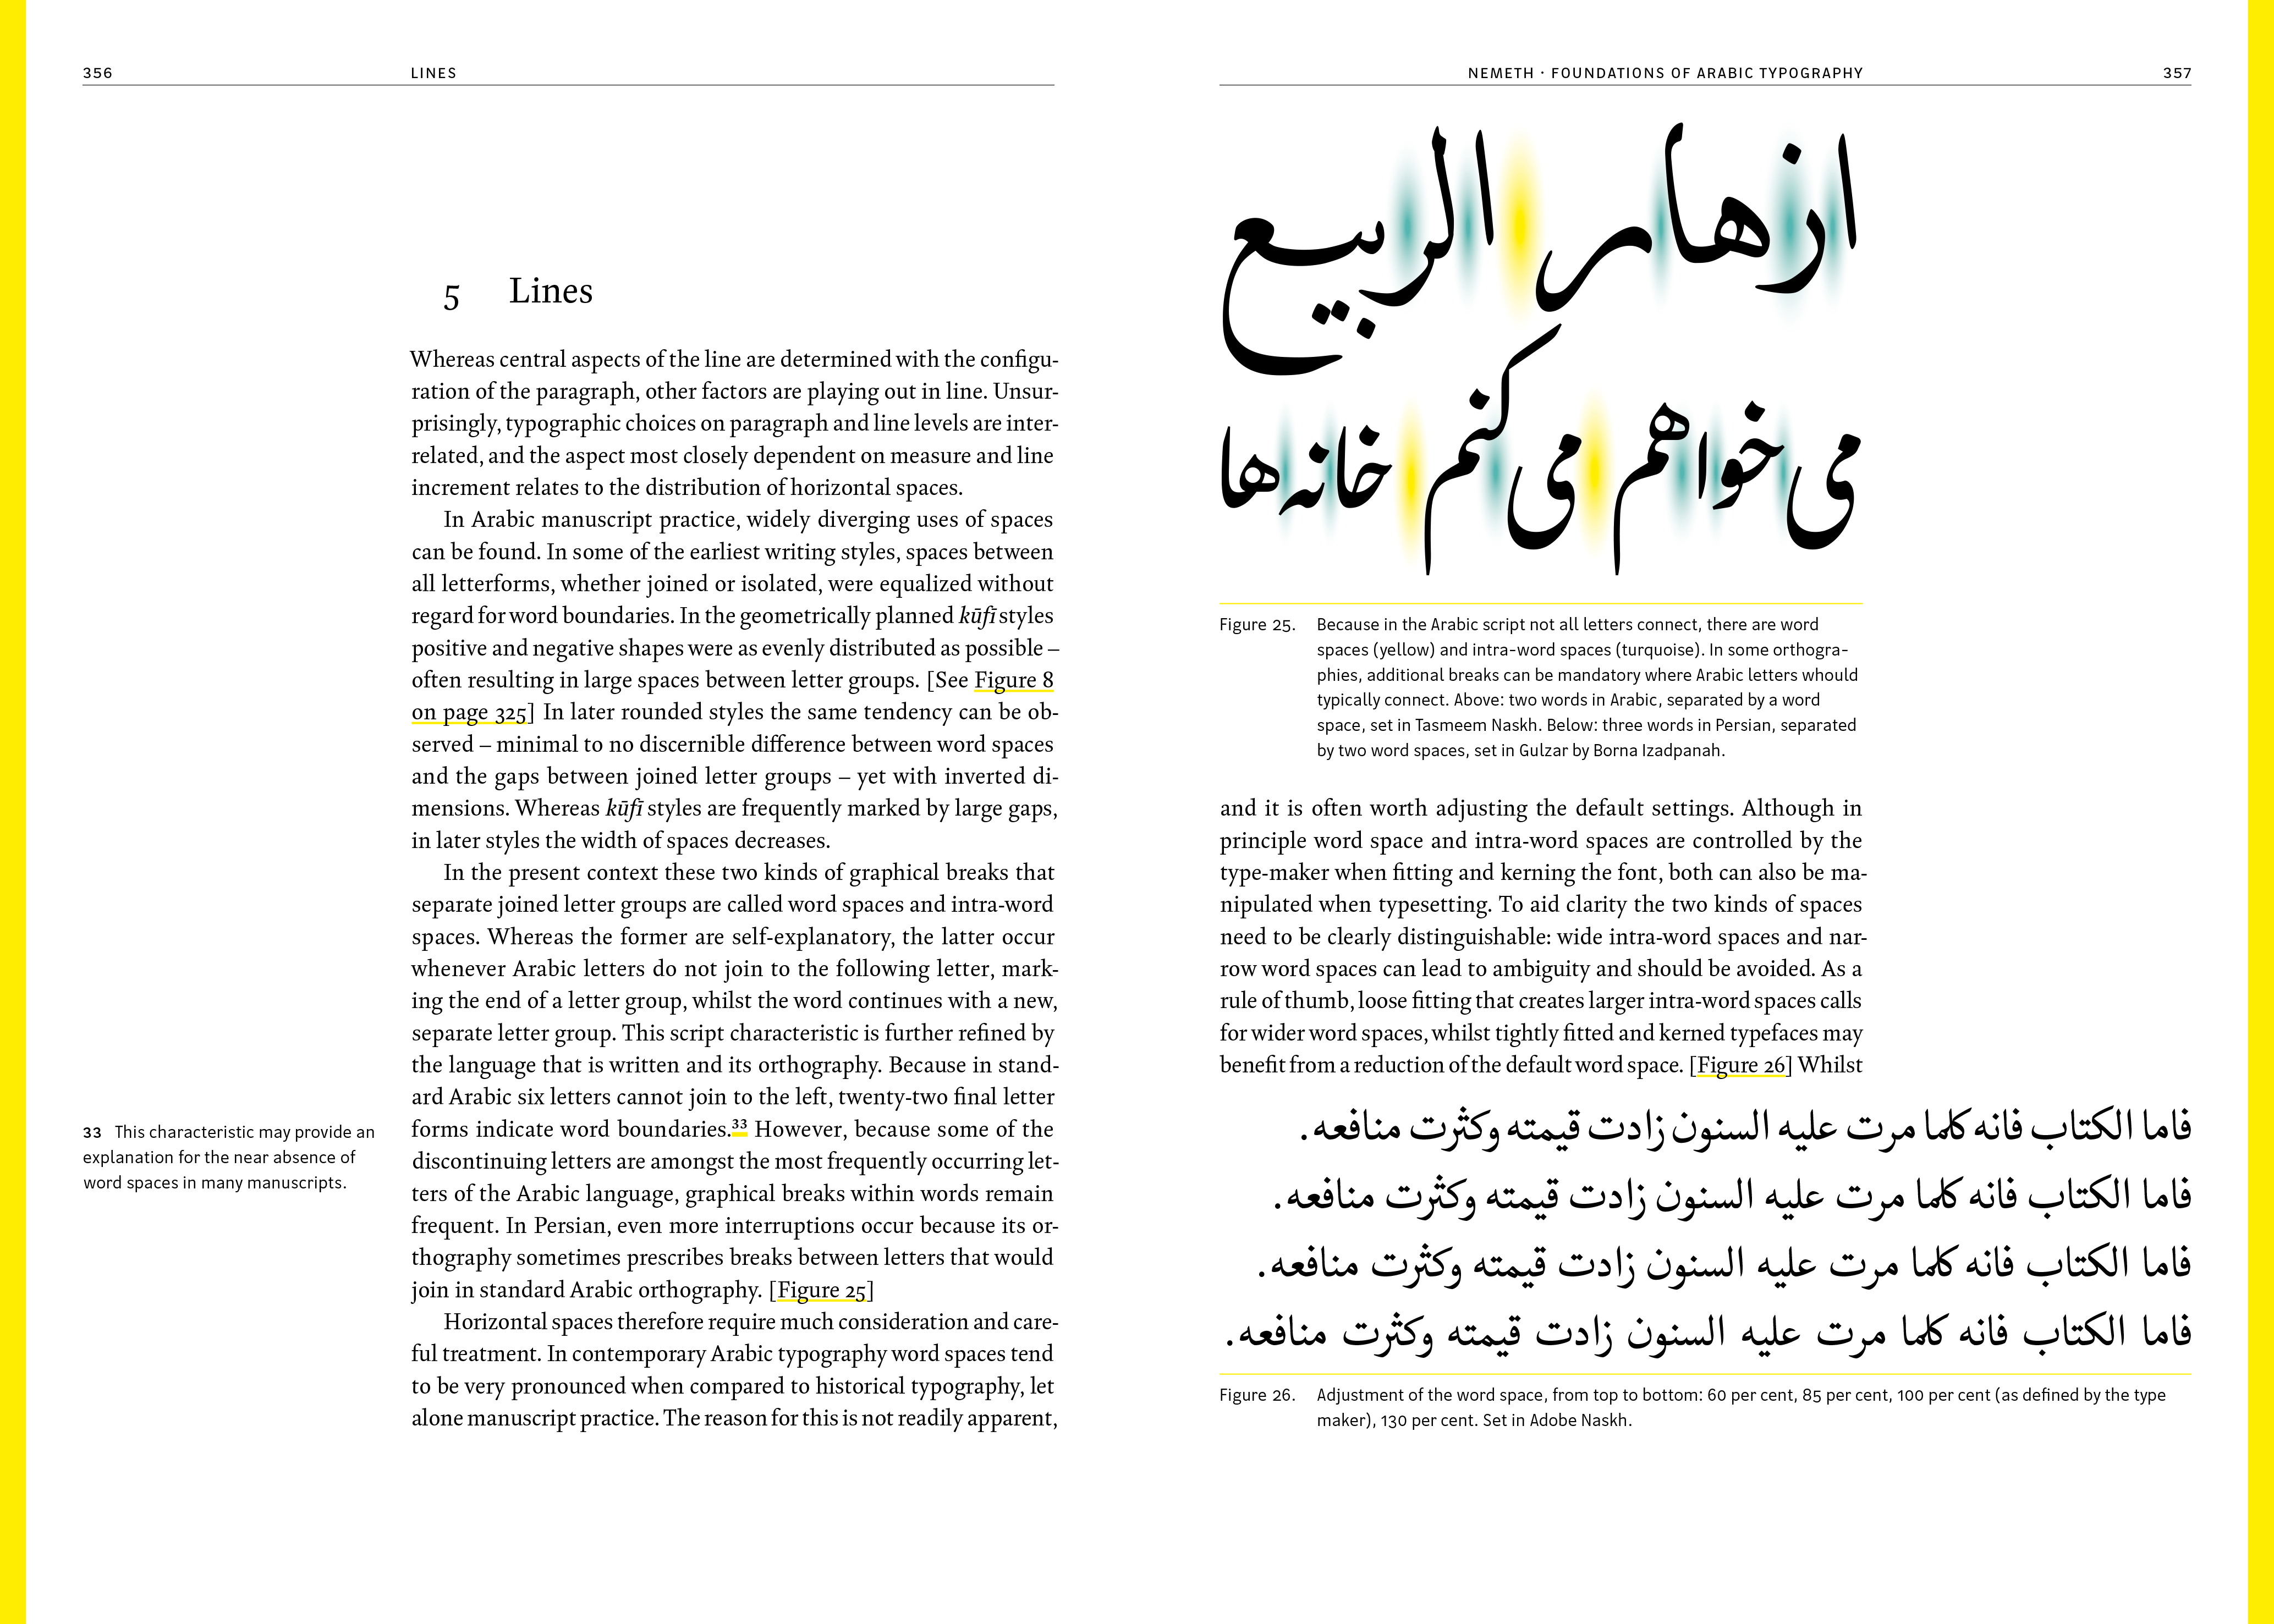 Arabic Typography: History and Practice pages 356-357